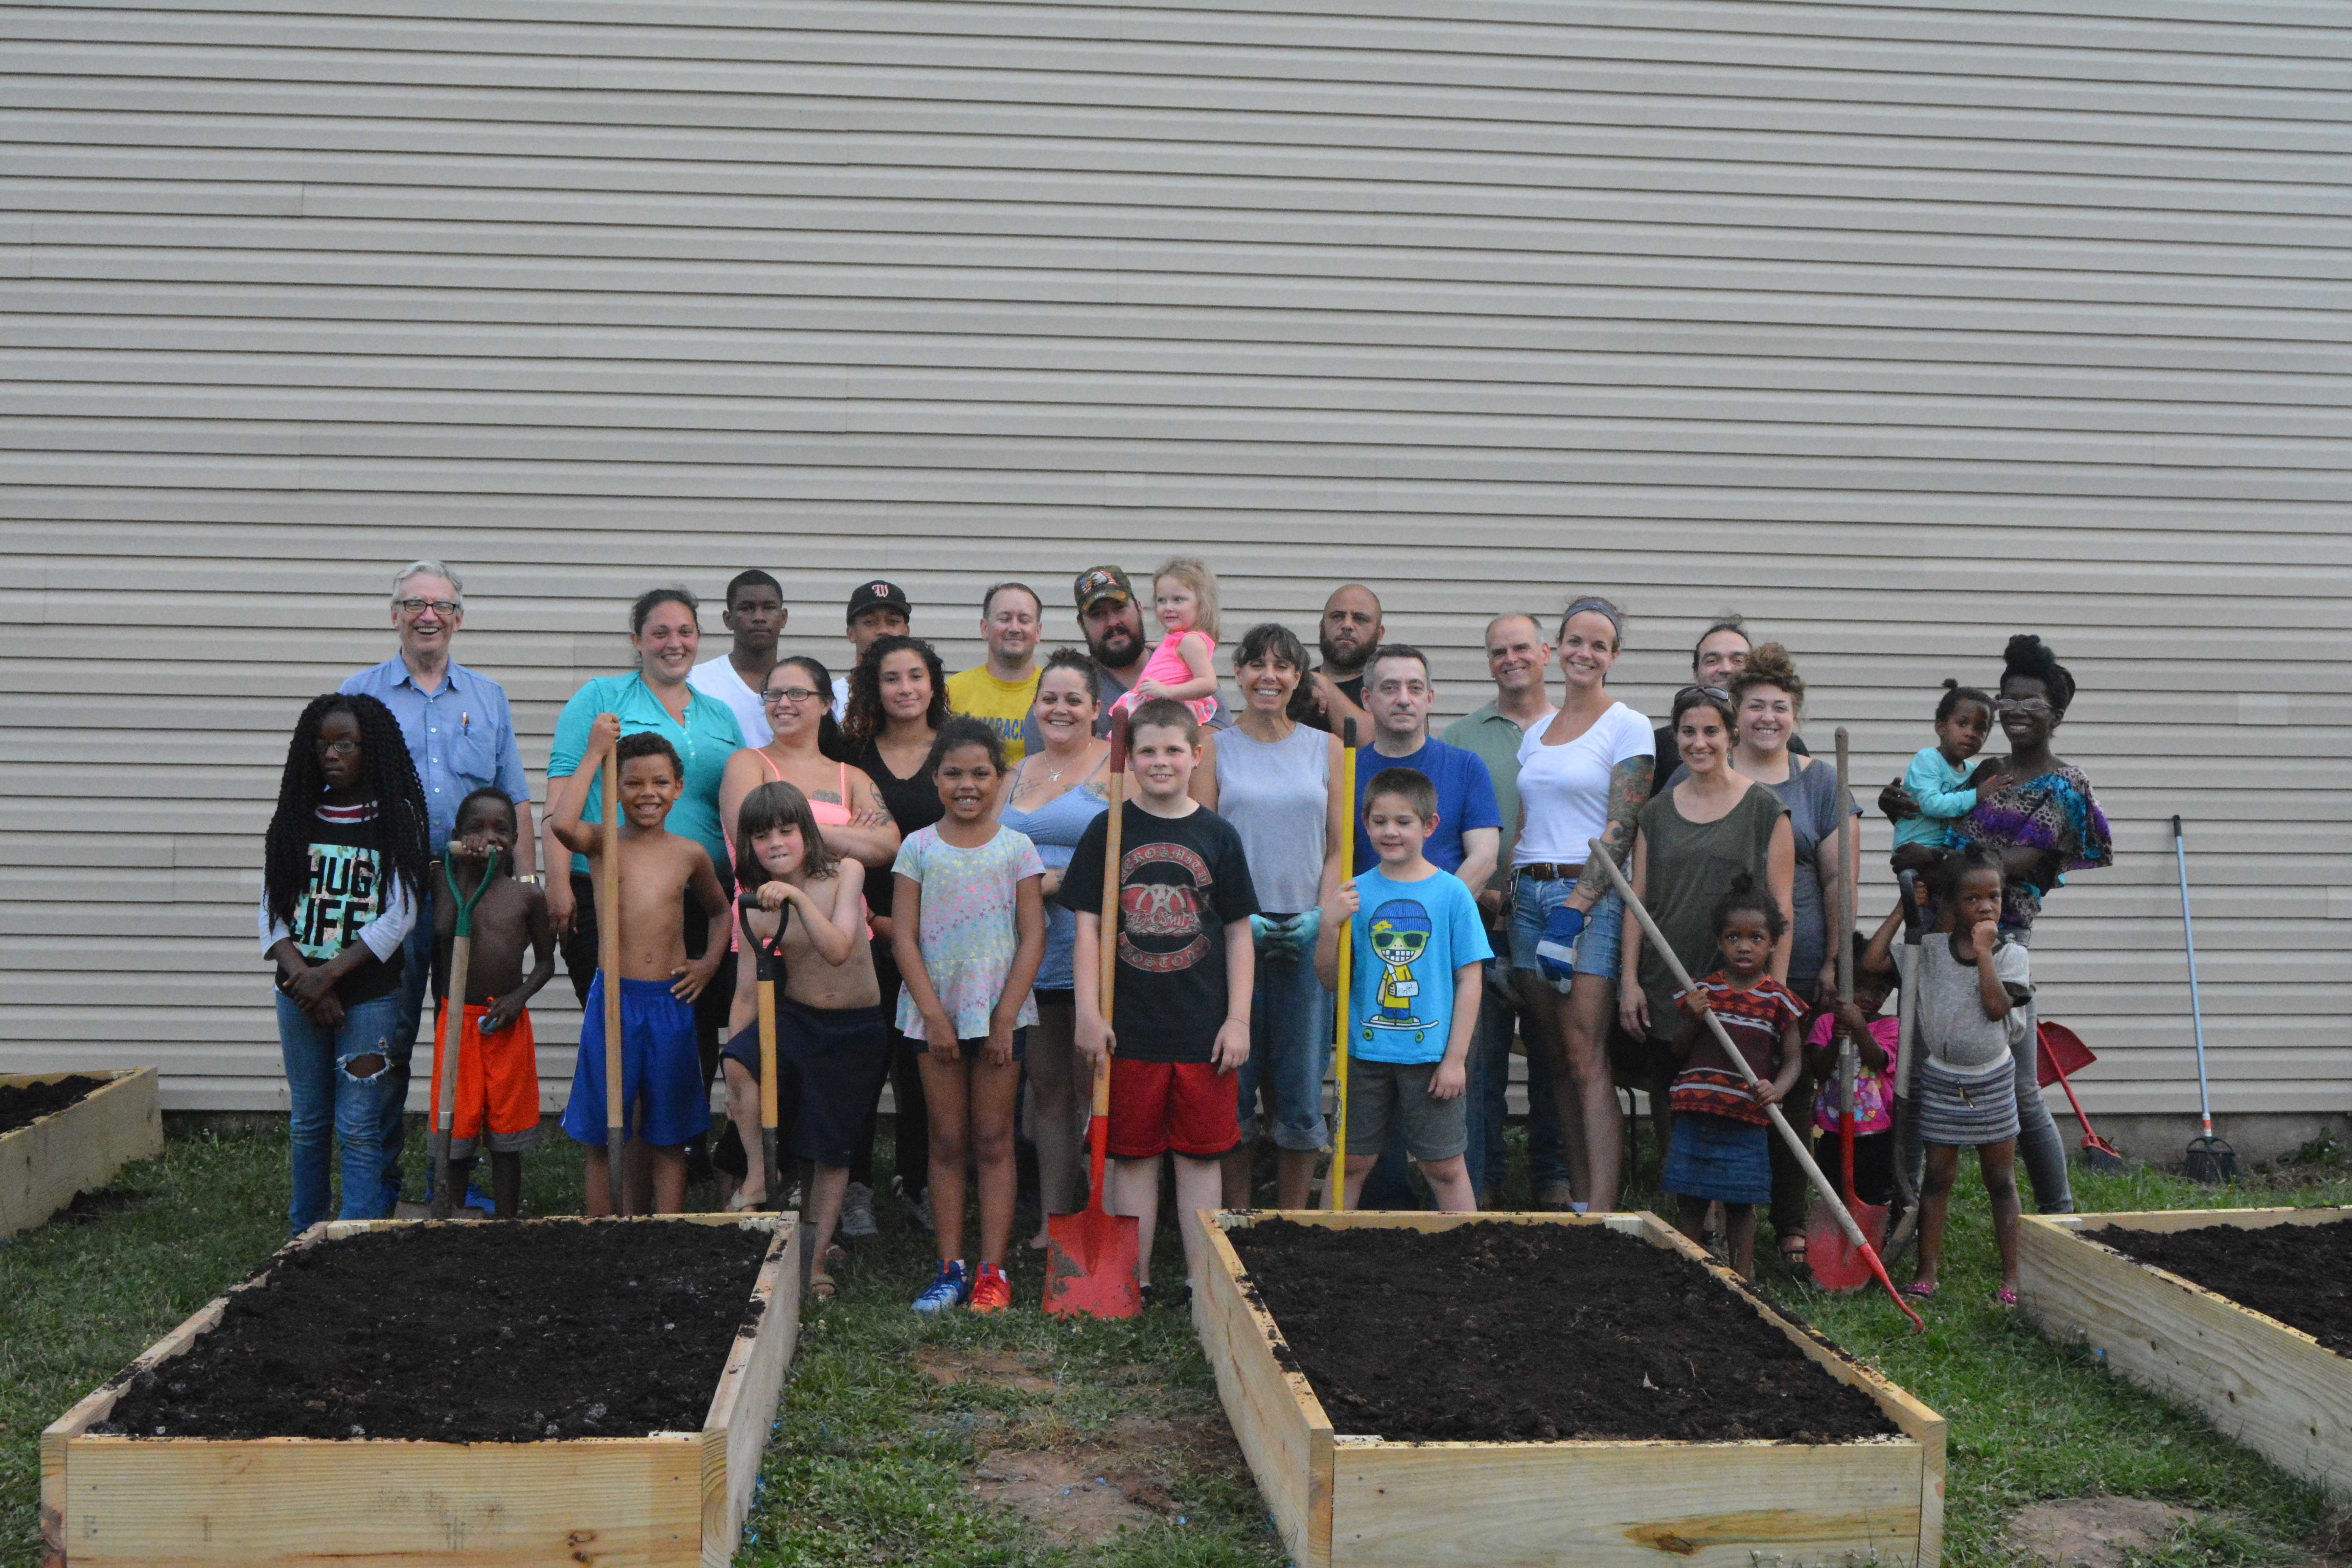 Williamsport residents young and old contribute to the Second Street Community Garden Project. Photo by Heart of Williamsport team, 2017. Used be permission.